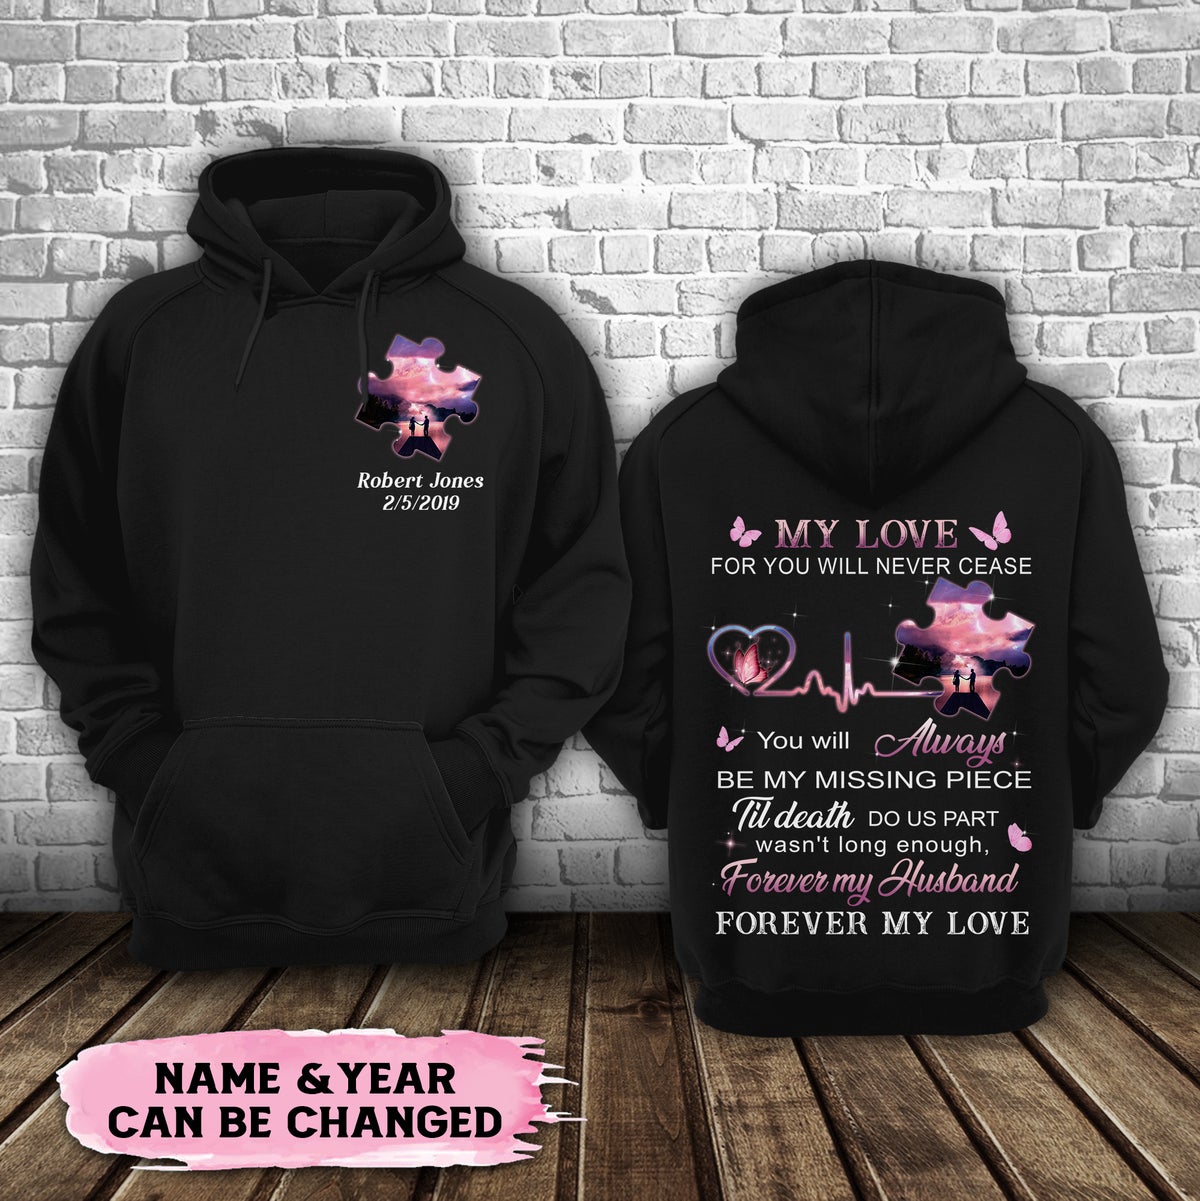 My Husband You Will Always Be My Missing Piece - Personalized All Over Print Hoodie